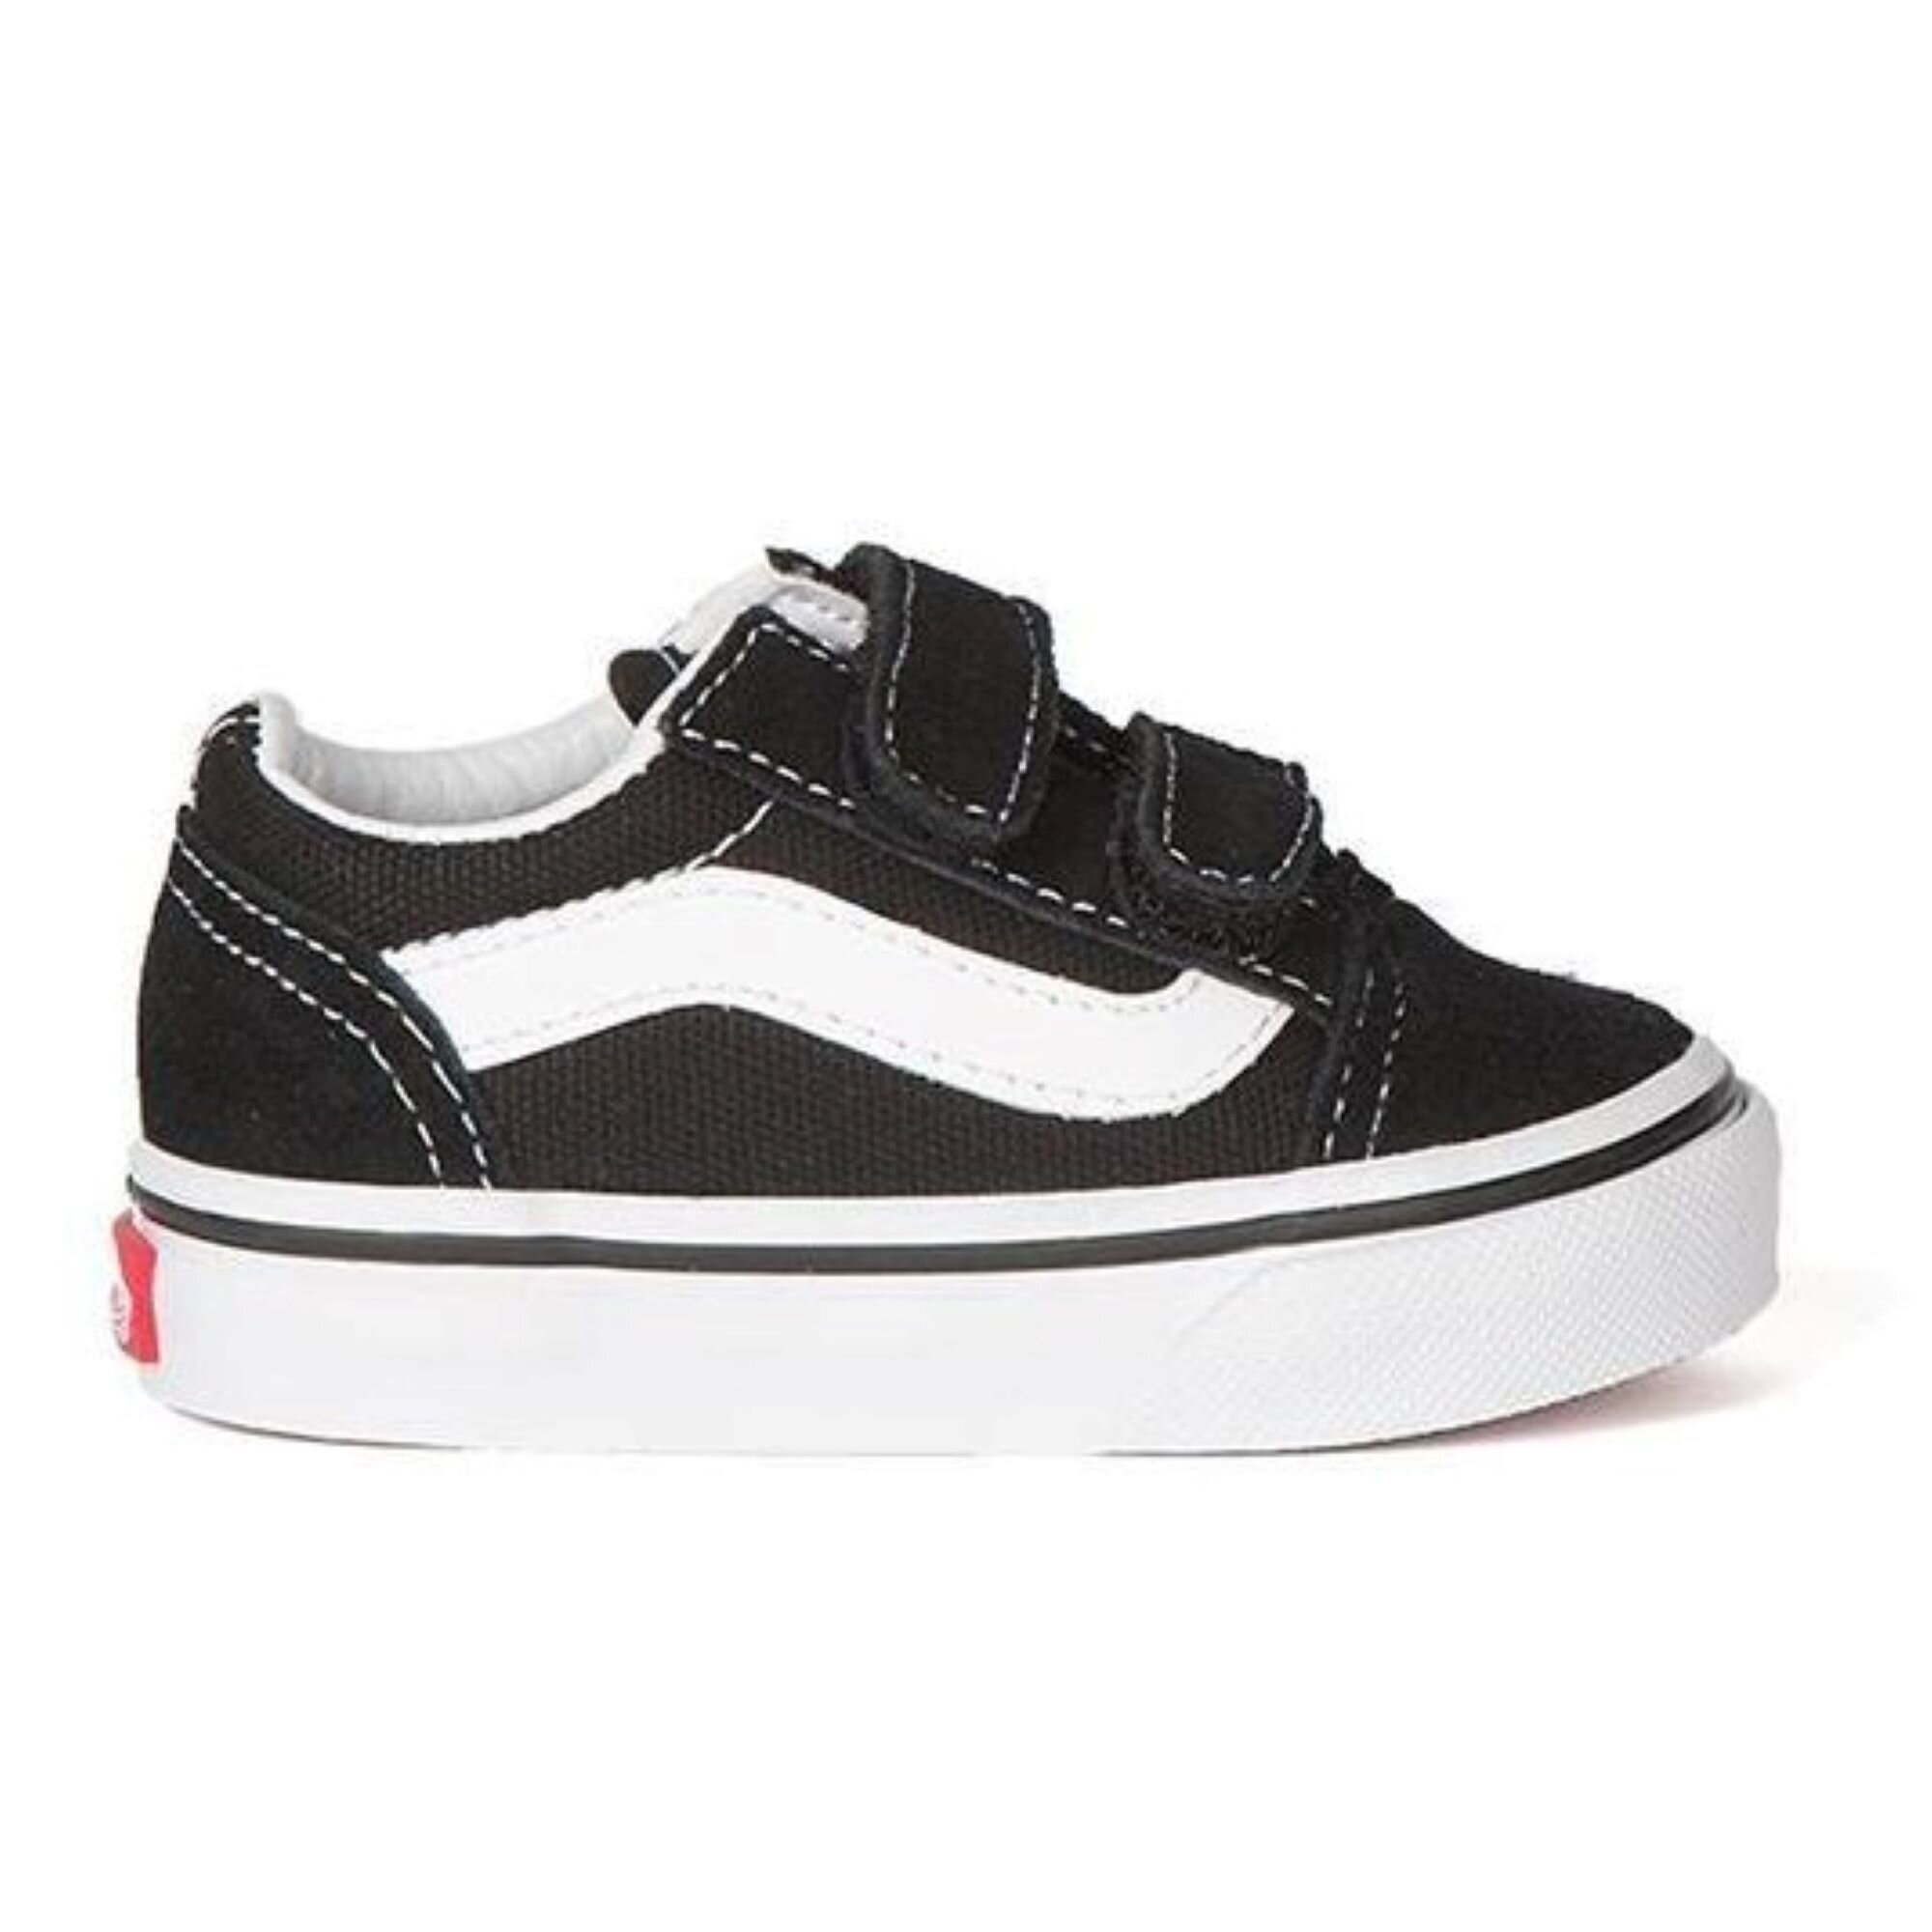 velcro vans for toddlers